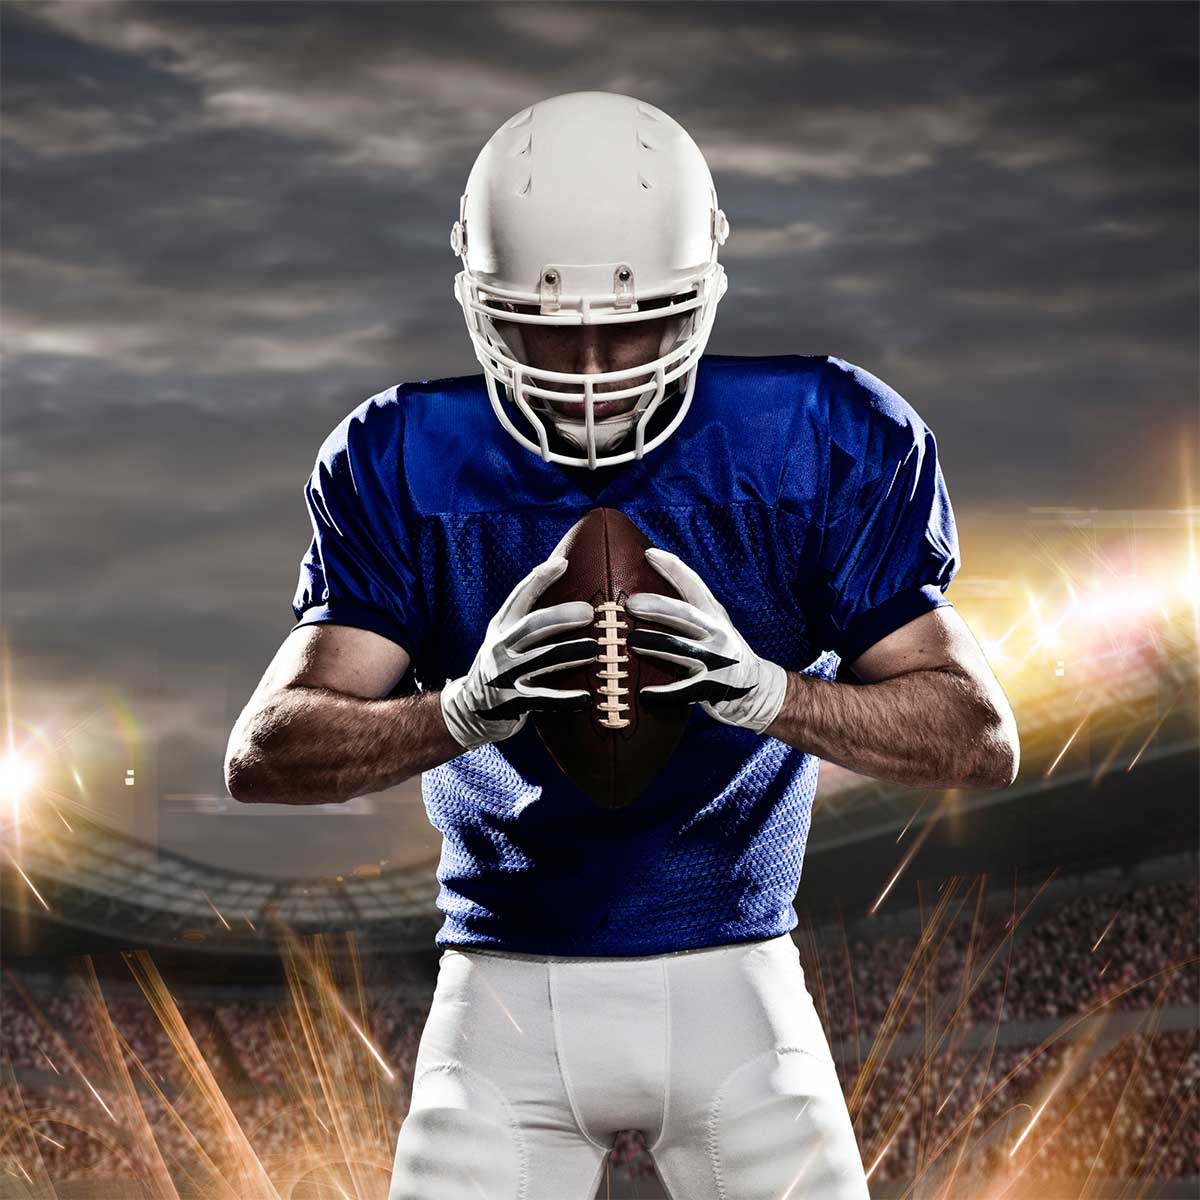 American Football Uniforms Manufacturers in Iceland